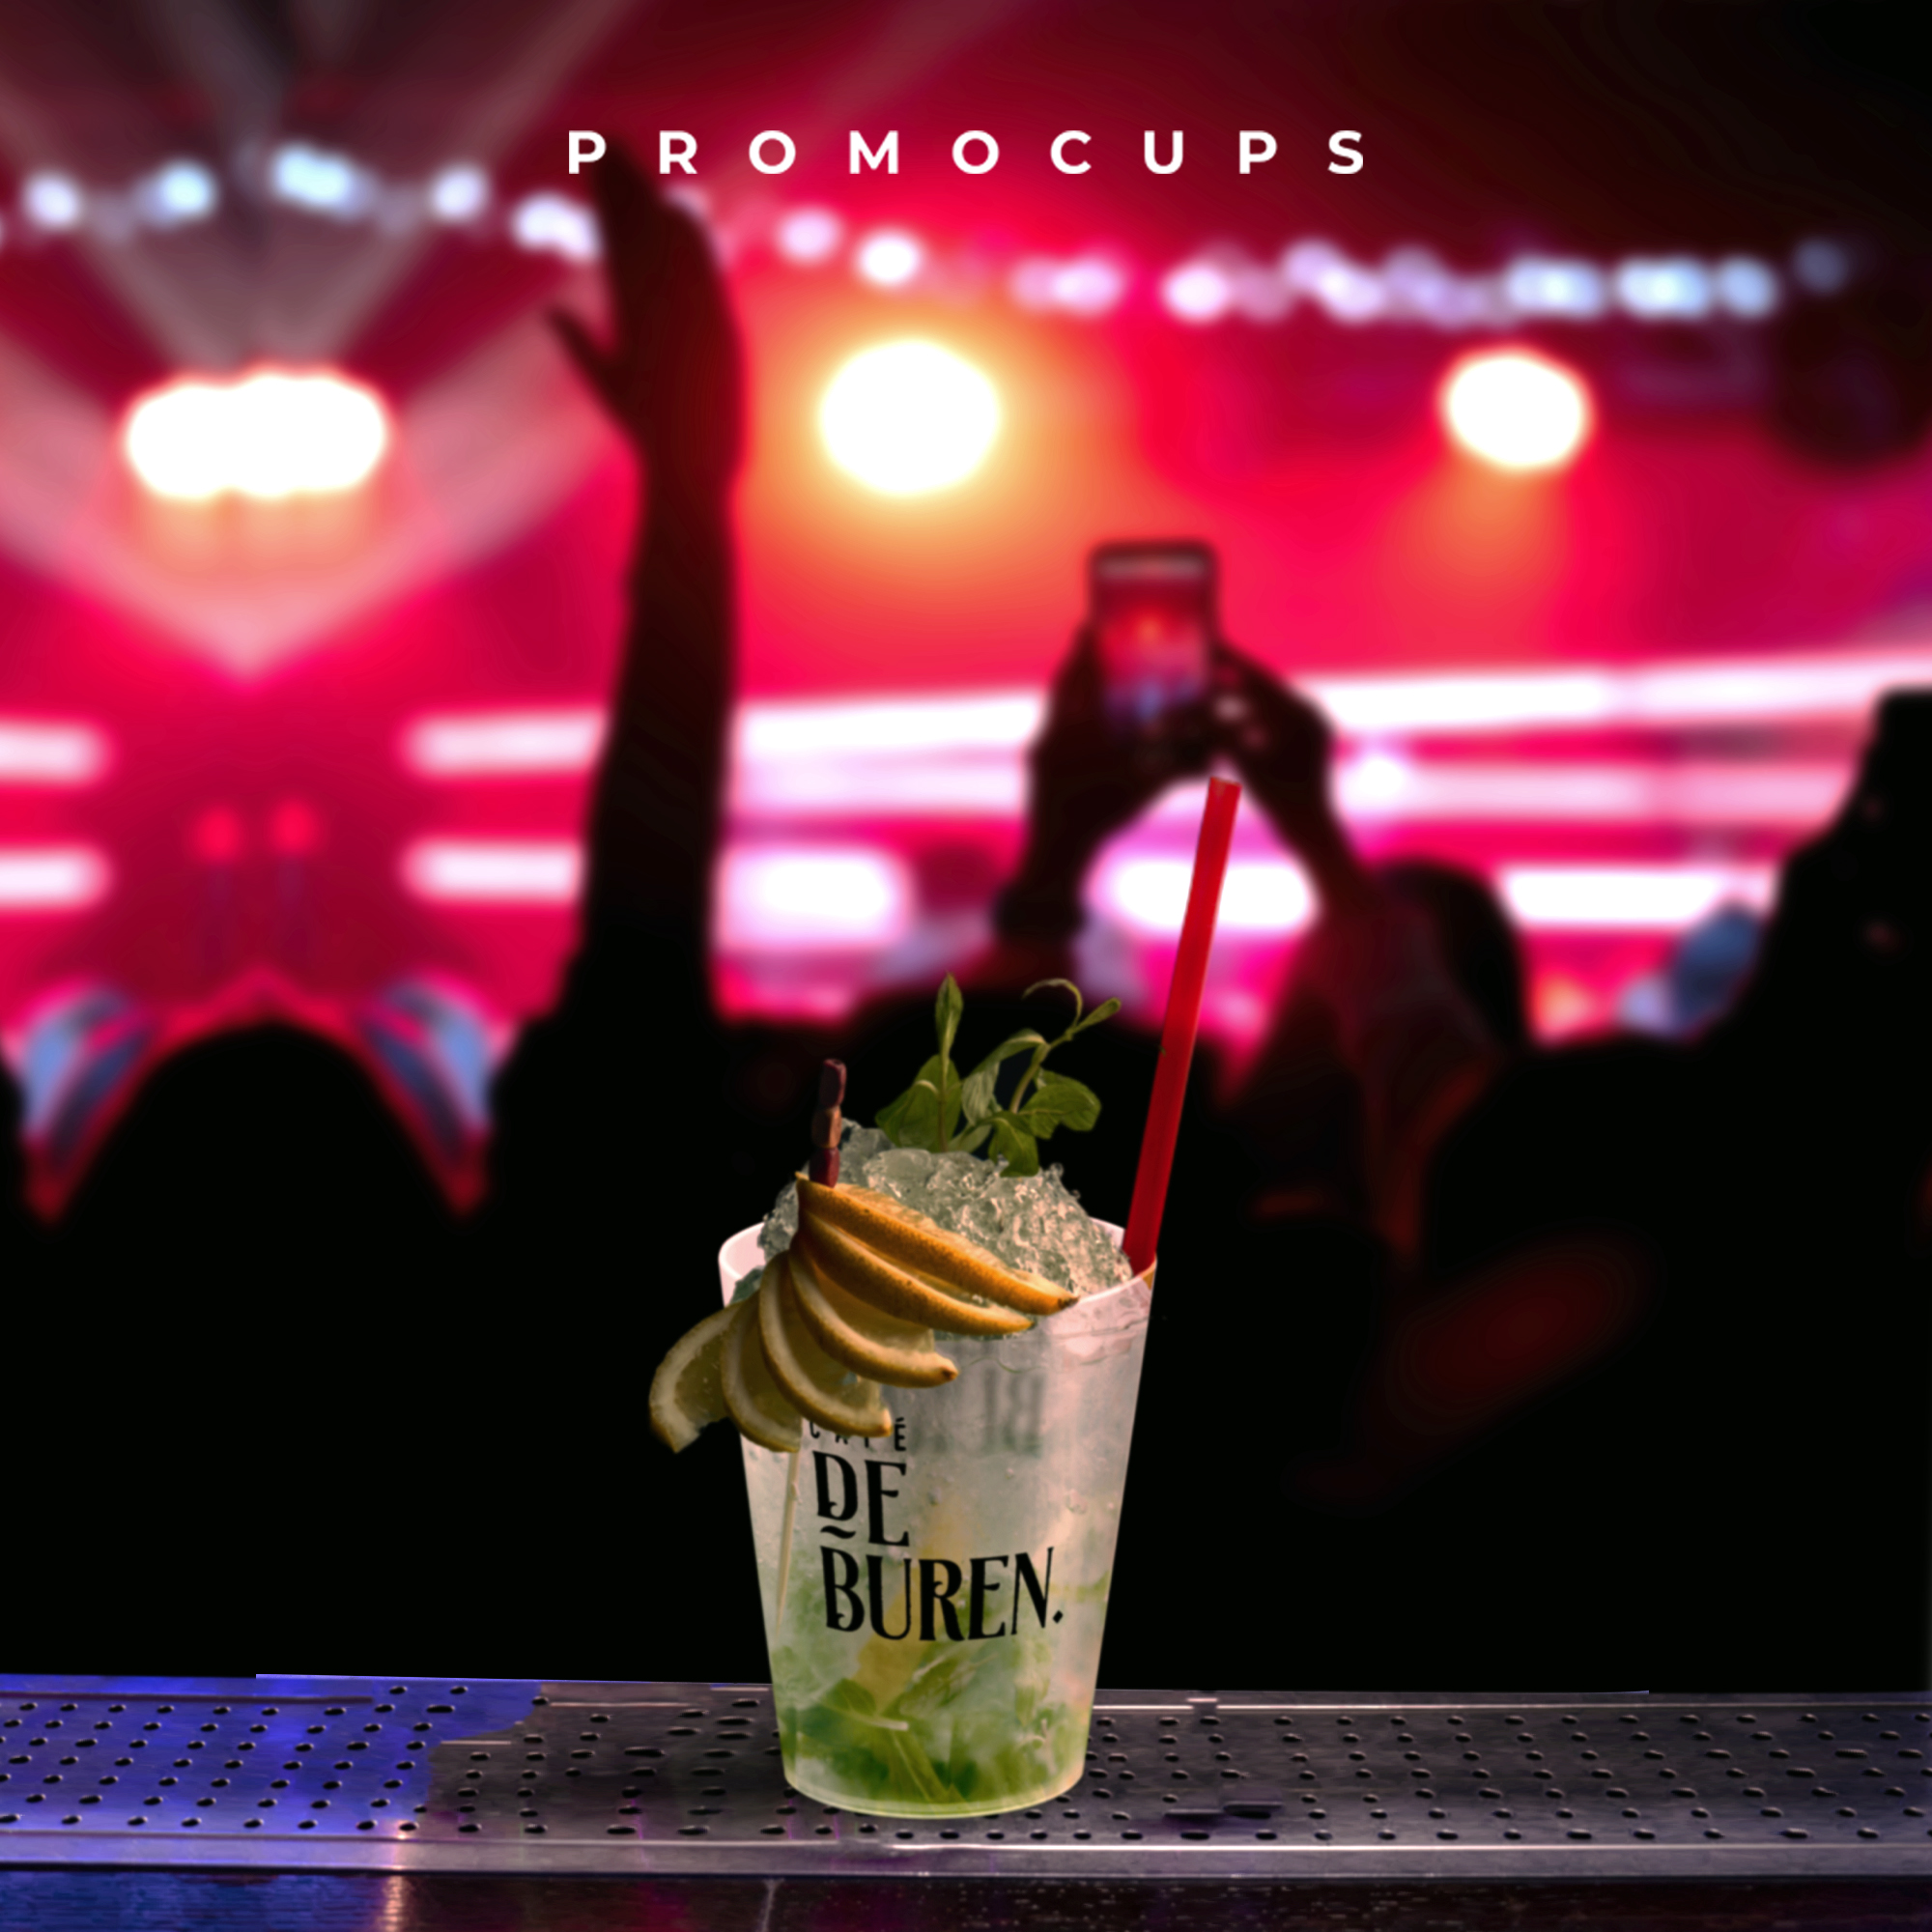 Promocups | The festival and event season is just around the corner!